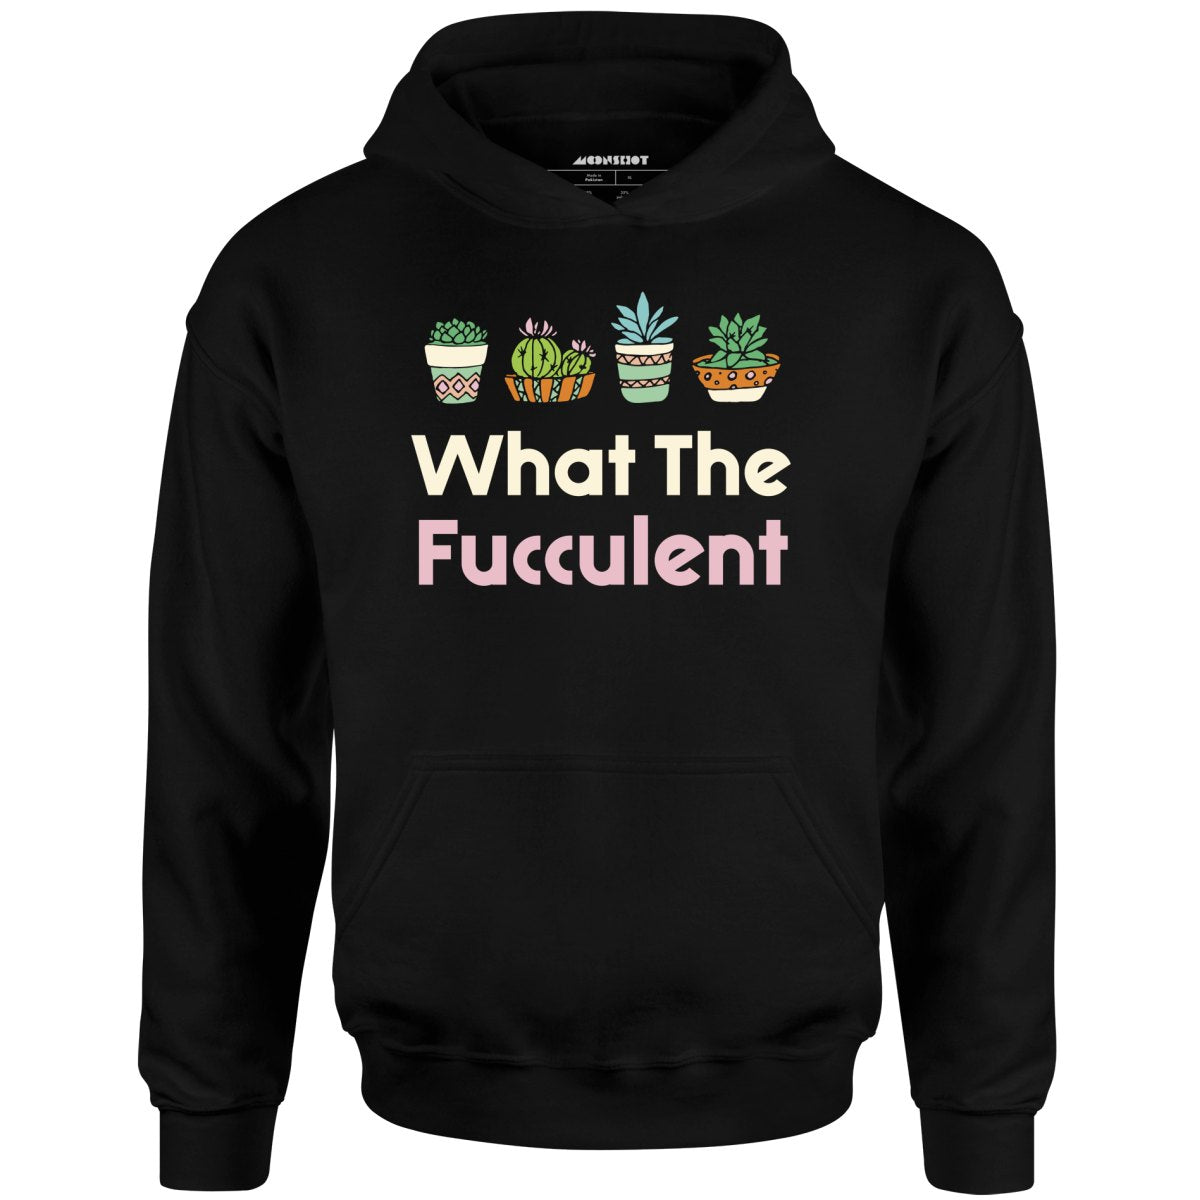 What The Fucculent - Unisex Hoodie